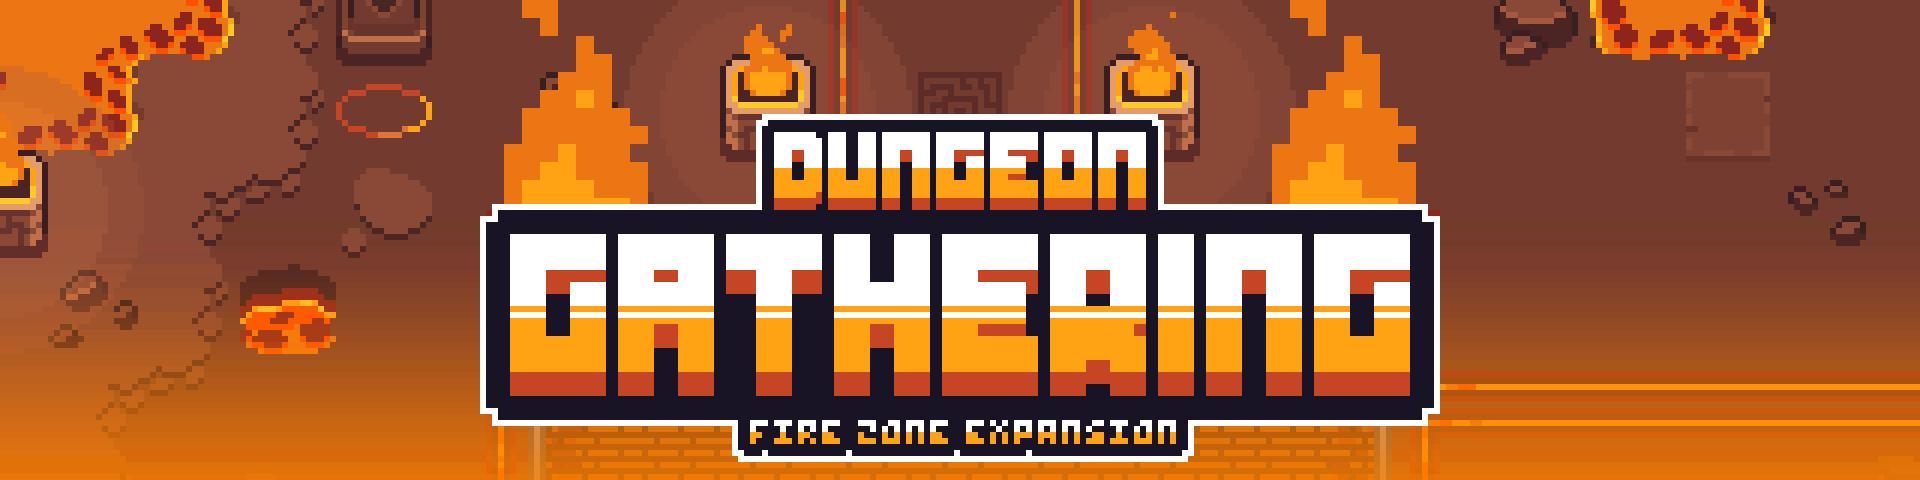 Dungeon Gathering - Fire Zone Expansion (16x16) + Updates